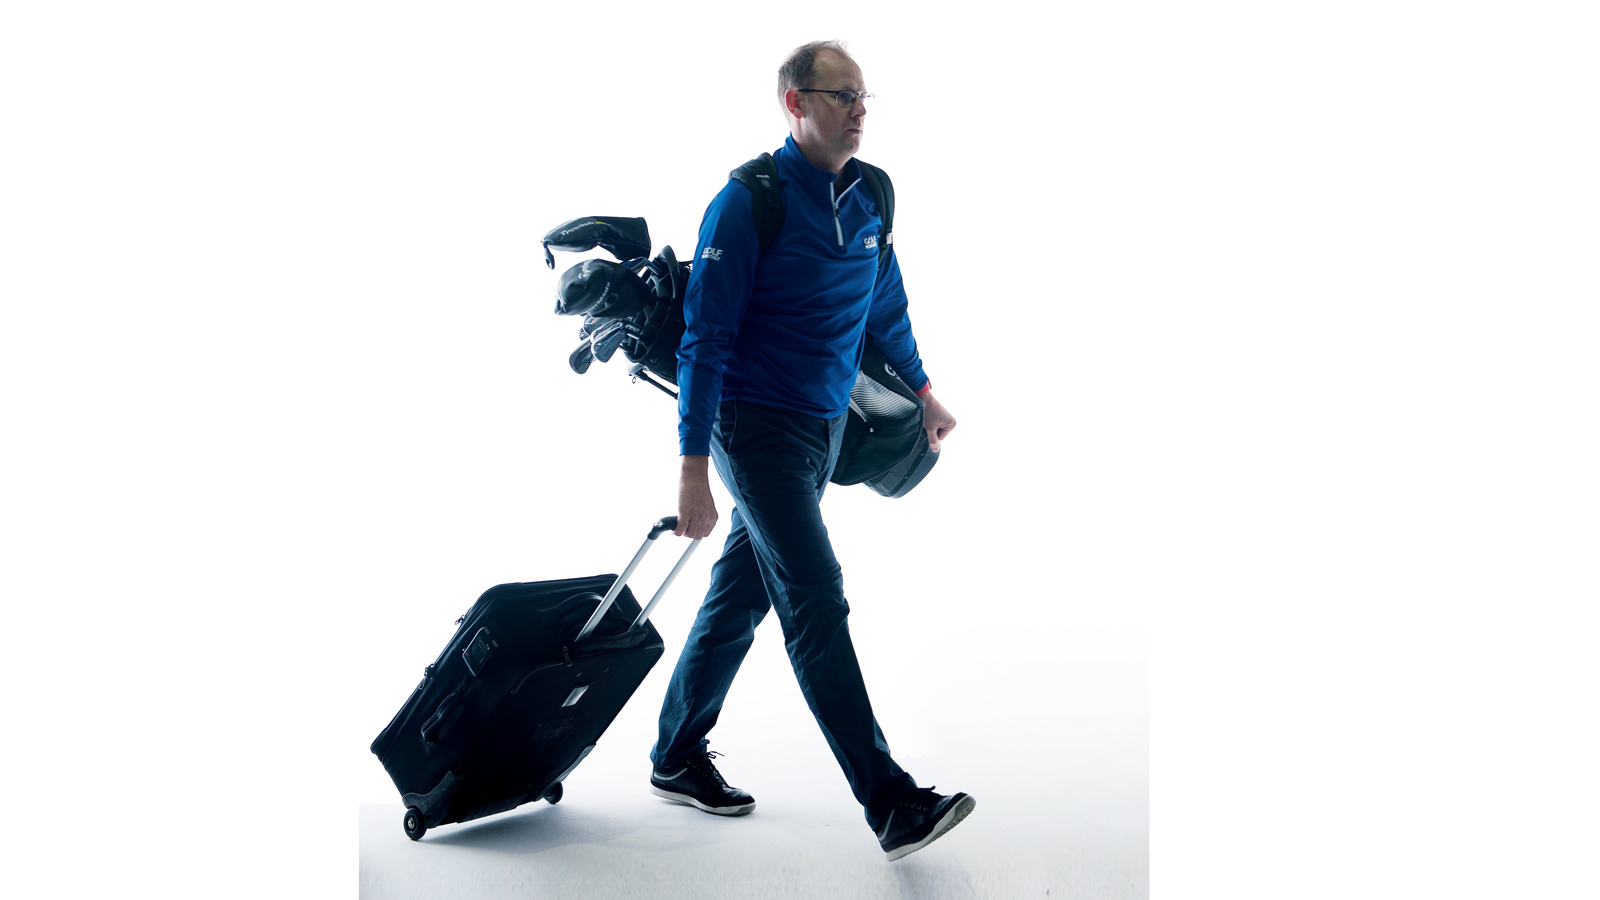 Hechting Kaliber Brandewijn How To Fly With Golf Clubs | Golf Monthly